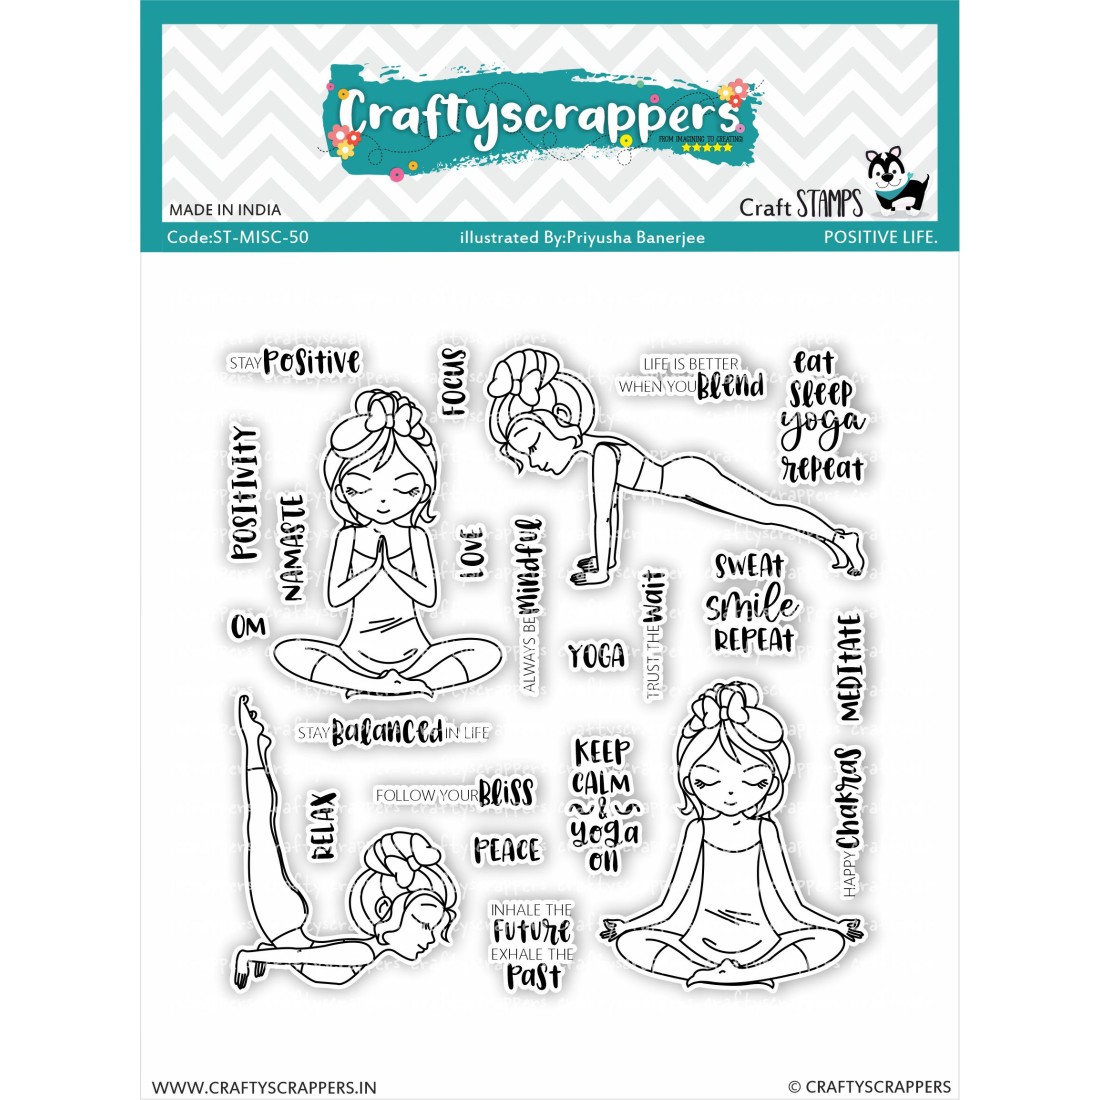 Craftyscrappers Stamps- POSITIVE LIFE